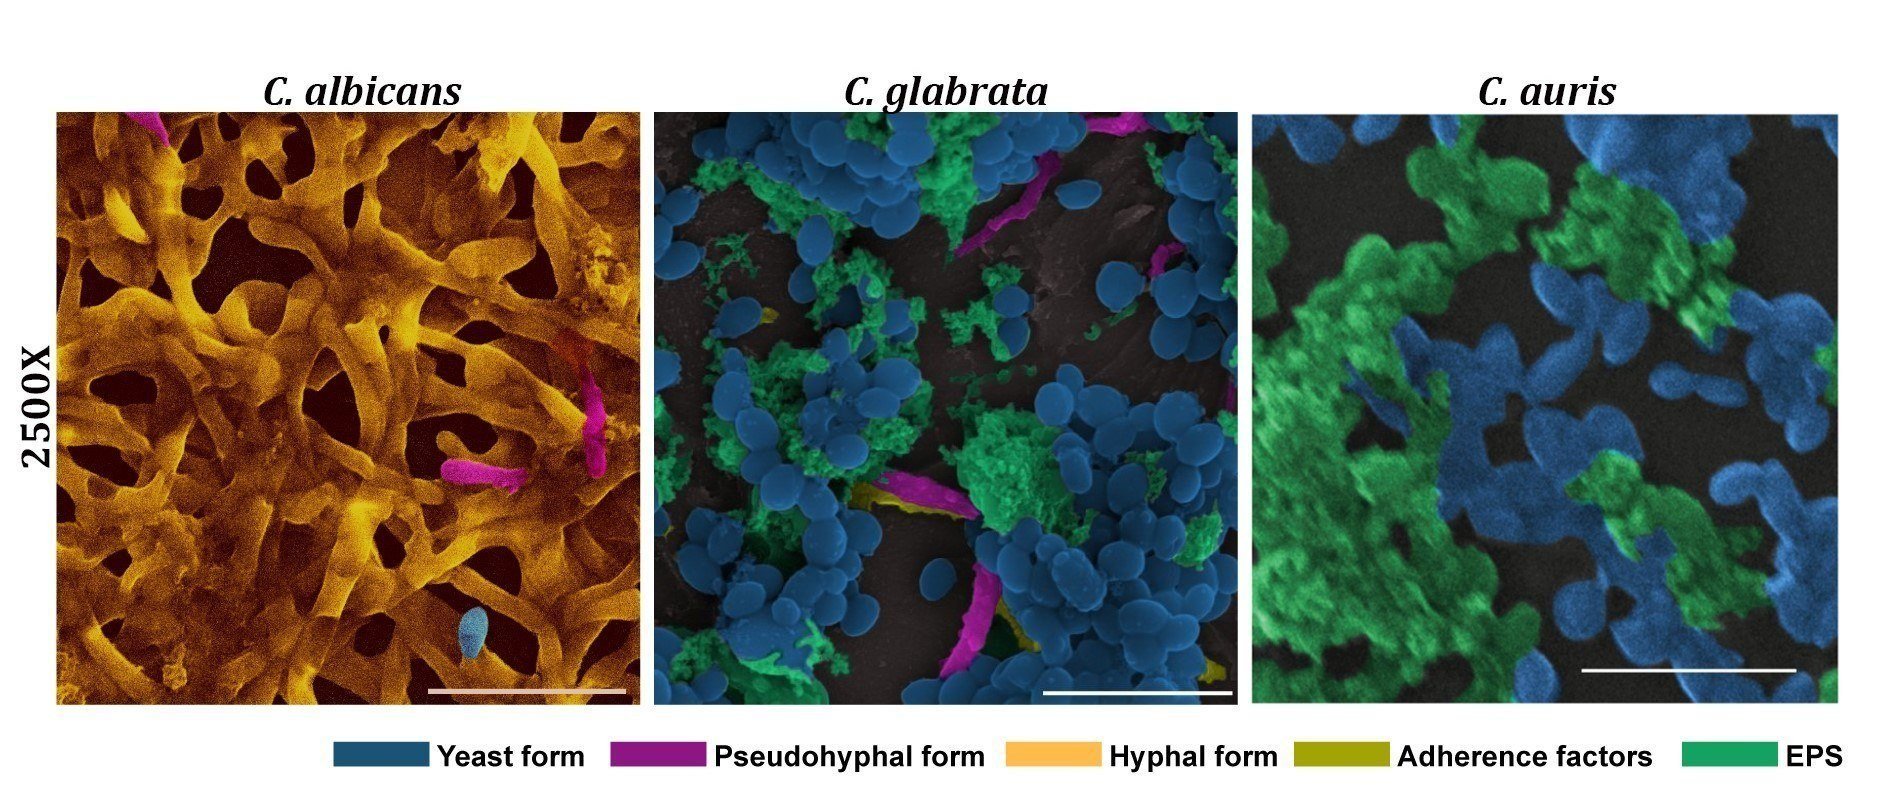 Architecture of the biofilm formed by the cells of three different pathogenic Candida species on gelatin-coated coverslips as captured under scanning electron microscopy (Scale bar: 30µm).